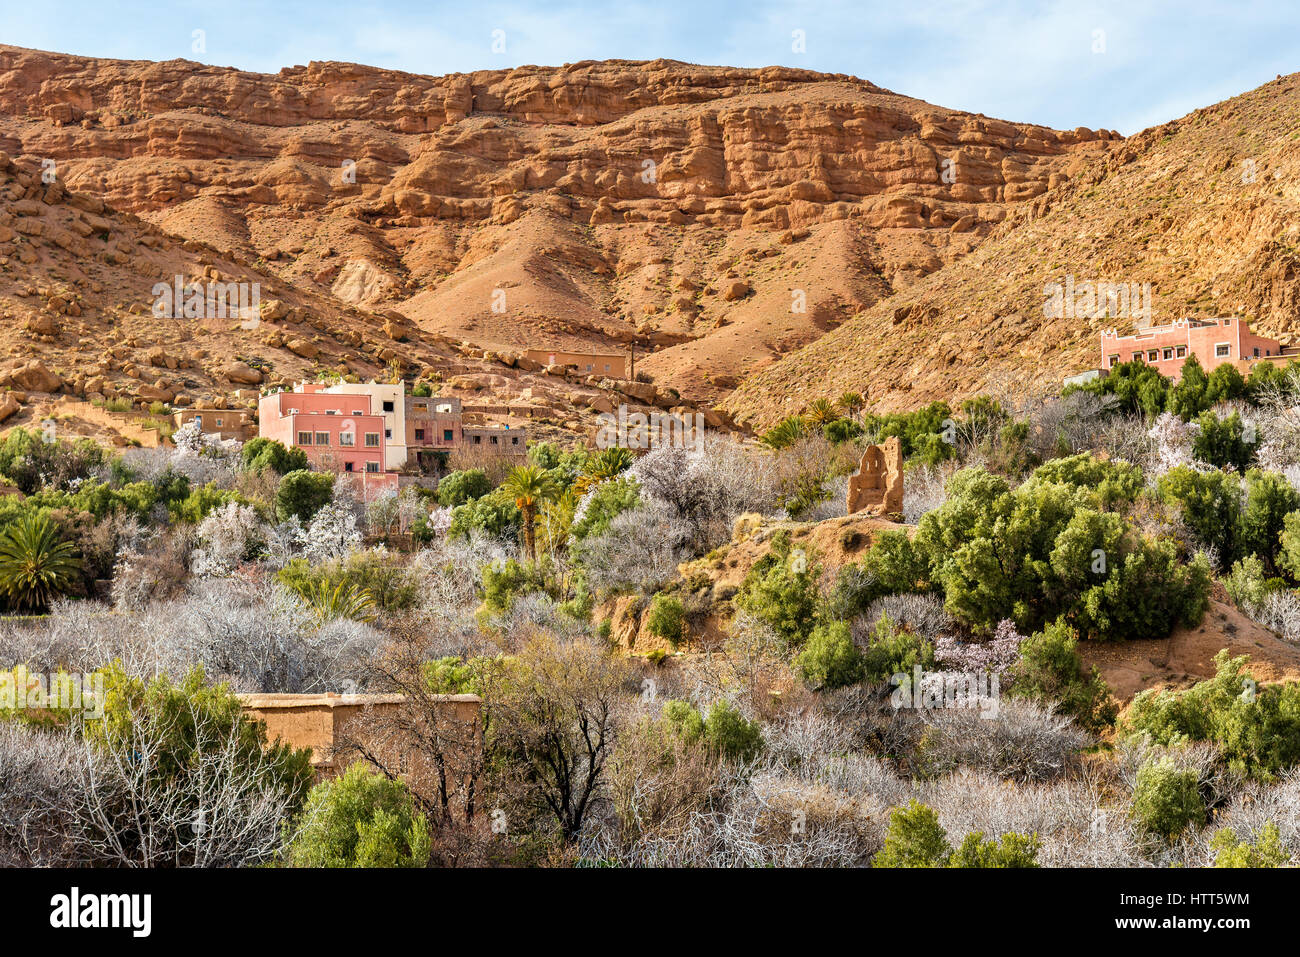 Landscape of Dades Valley in the High Atlas Mountains, Morocco Stock Photo